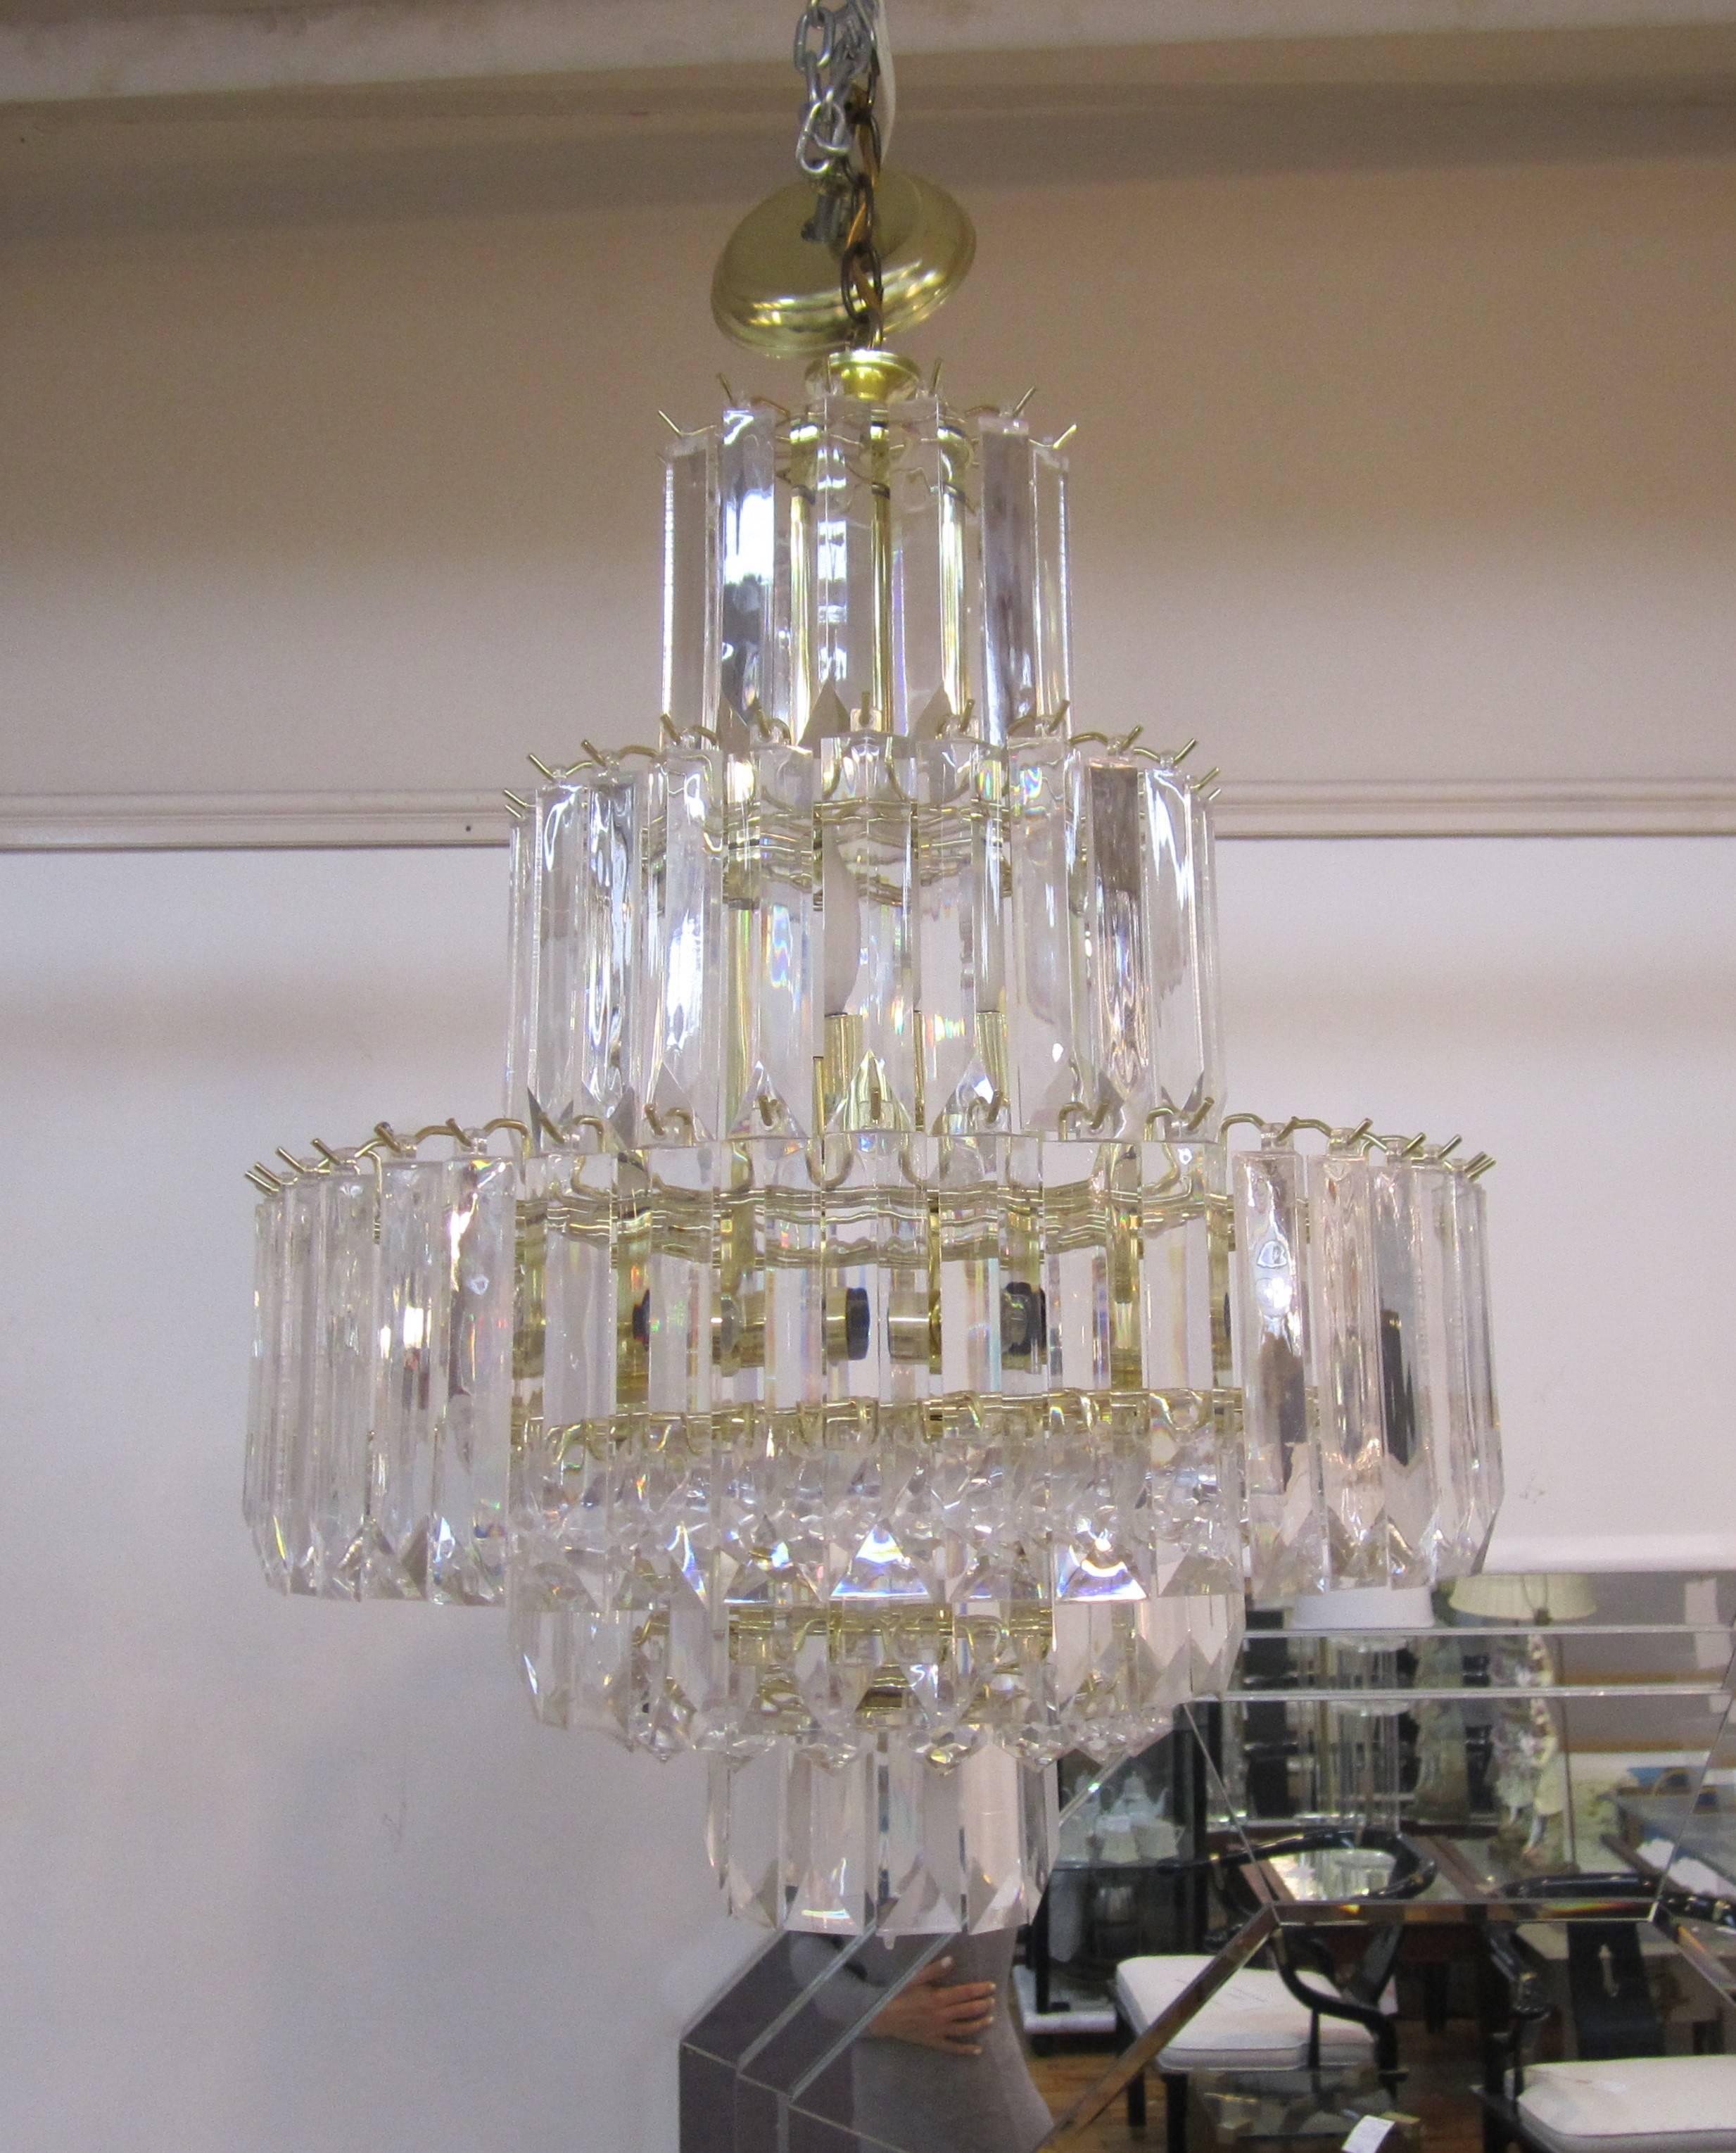 A beautiful seven-tier, nine-light, vintage Modern Lucite 'Wedding Cake' chandelier in the style of designer Charles Hollis Jones. A great alternative to crystal without the weight or cost, circa 1960s - 1970s Modern. 

Measurements: 
26